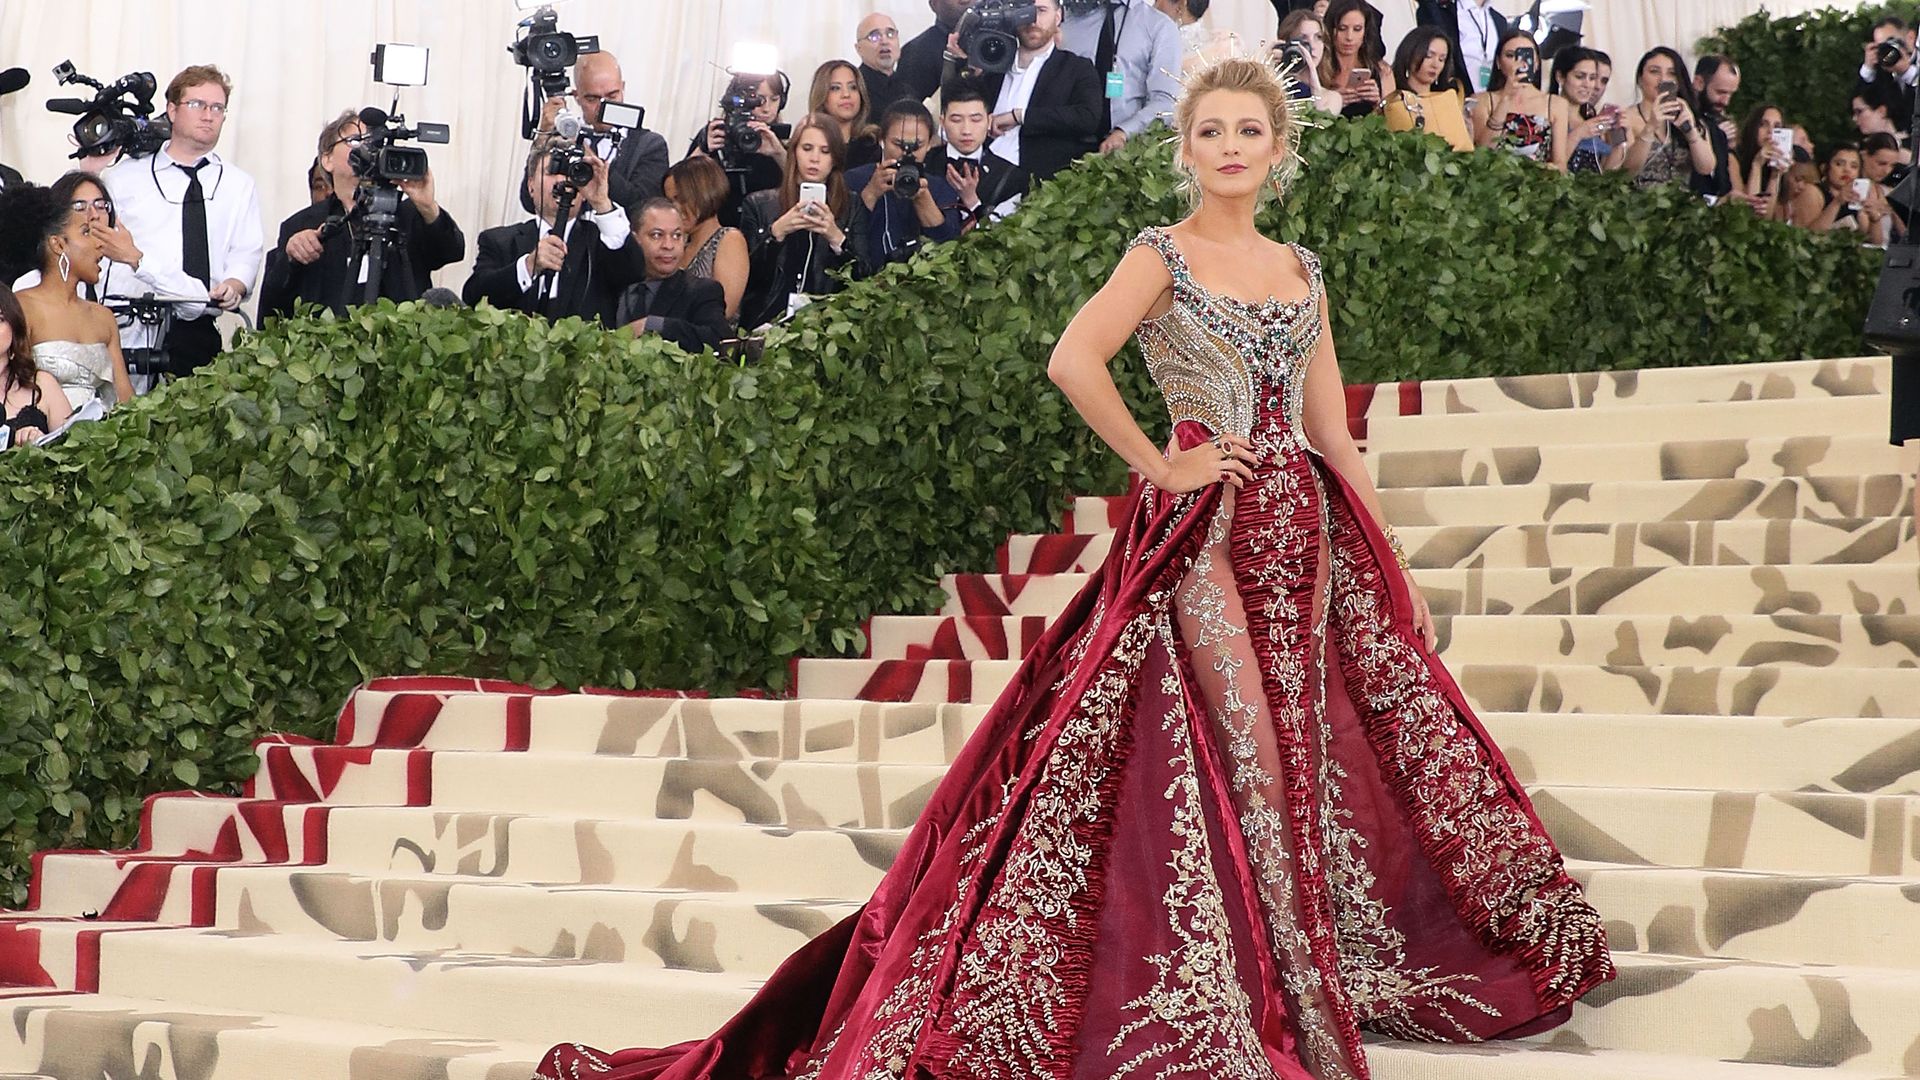 When Is the Met Gala 2023? Know the Date, Theme, Guest List